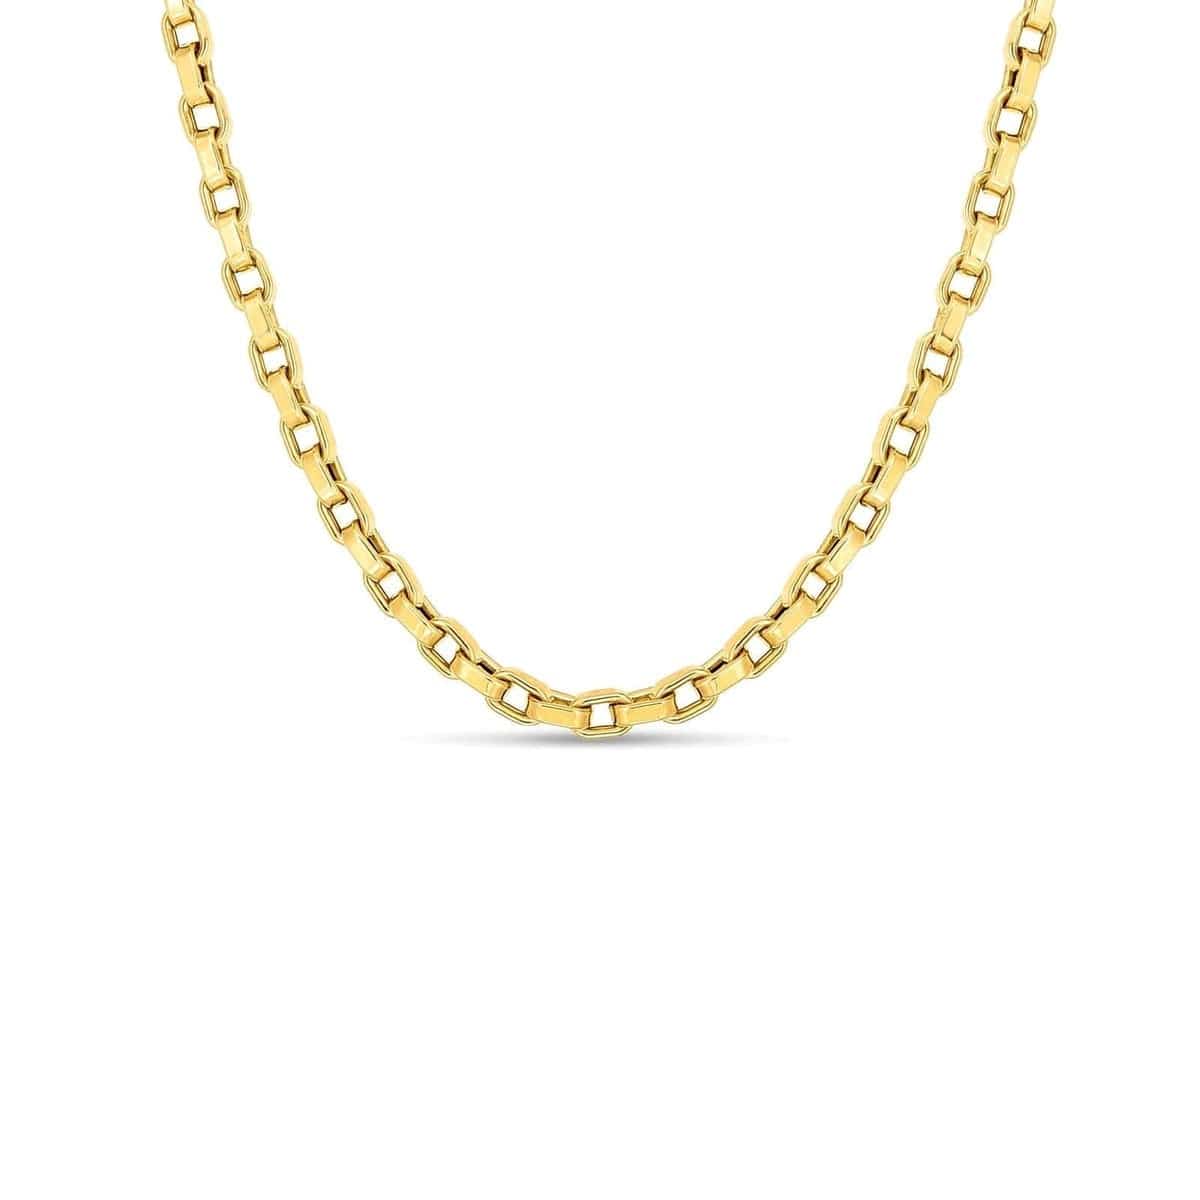 Roberto Coin 18K Yellow Gold Square Link Chain